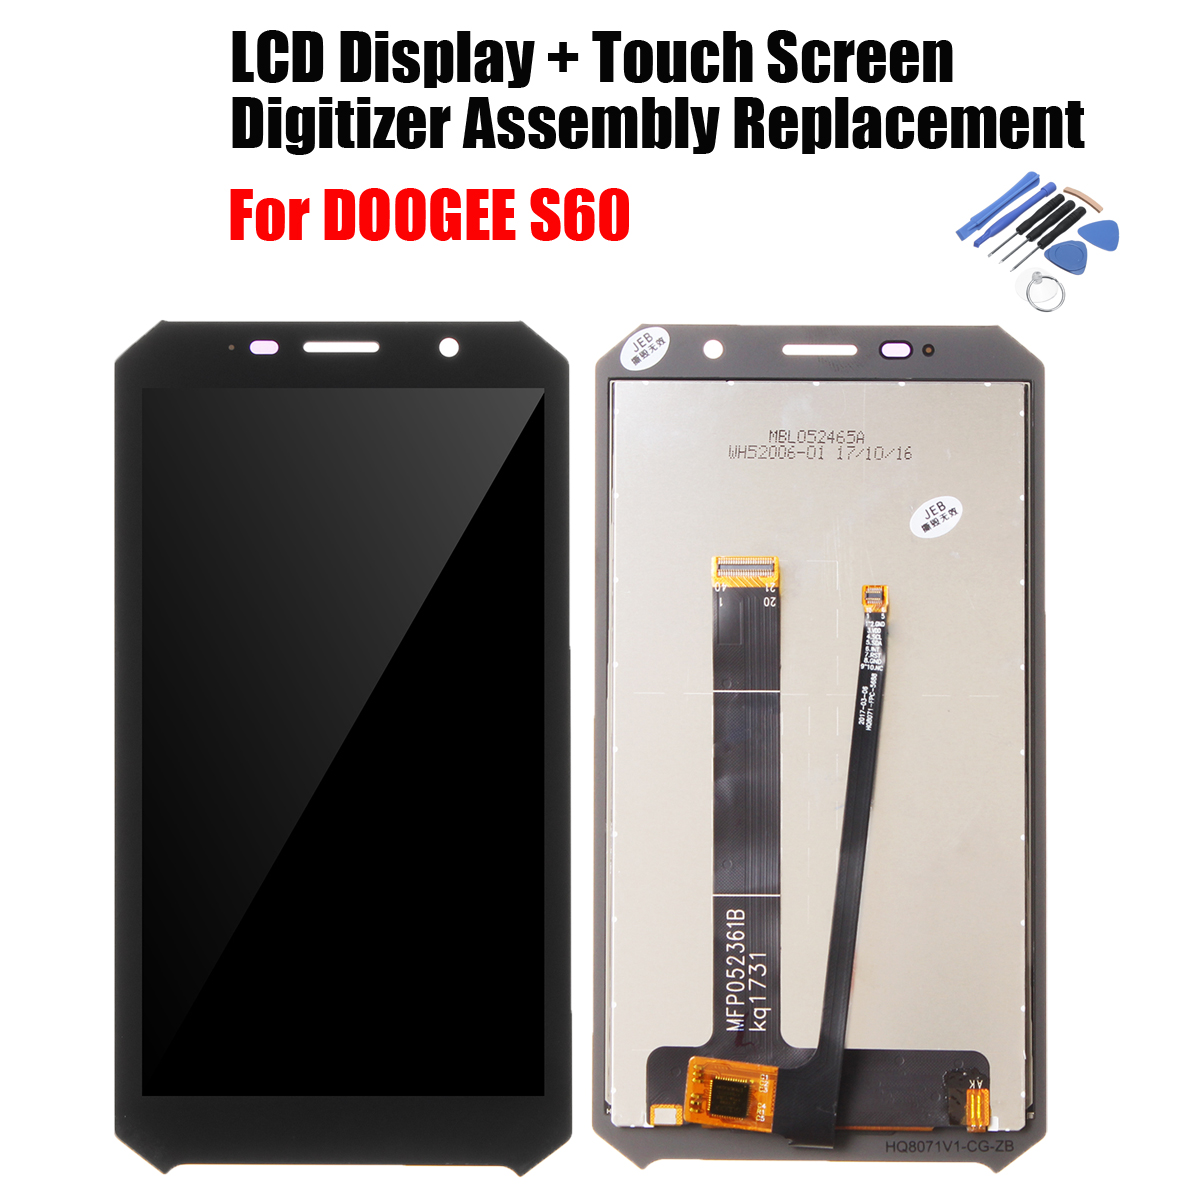 Full-Assembly-LCD-DisplayTouch-Screen-Digitizer-Replacement-With-Repair-Tools-For-DOOGEE-S60-1415752